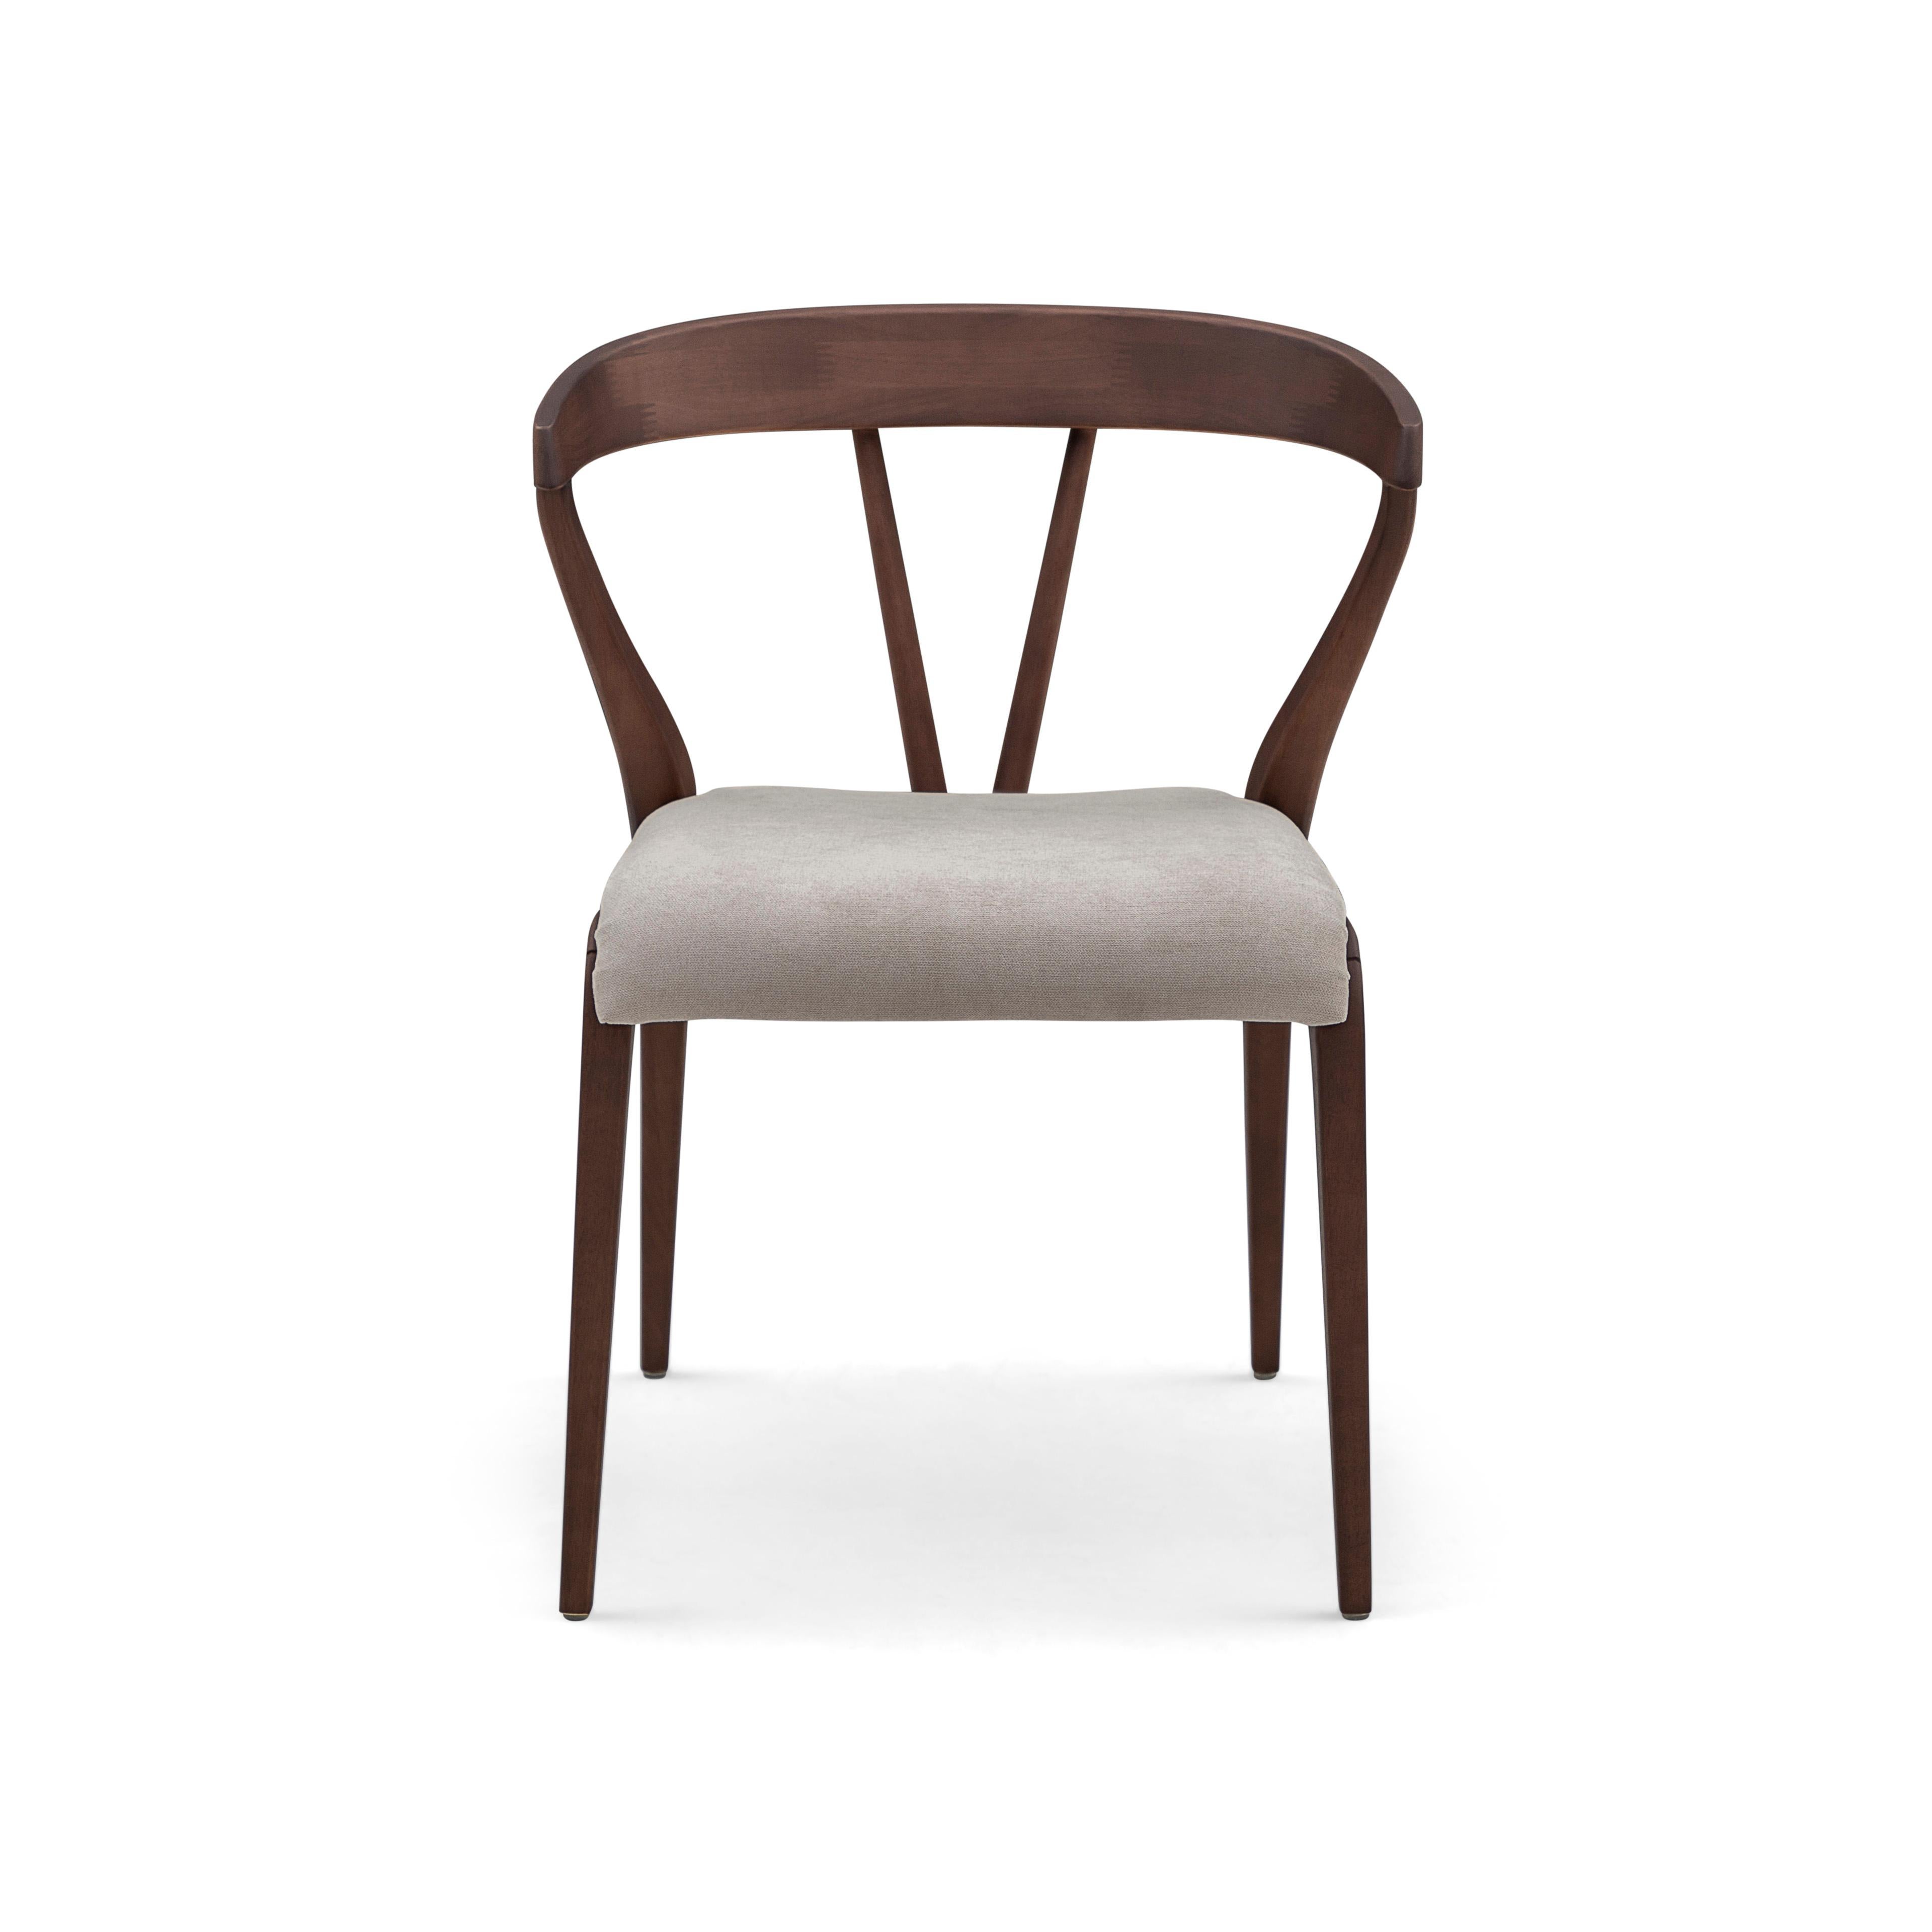 Our Uultis team has created the beautifully shaped Mat dining chair to decorate your beautiful dining table with an upholstered seat in a light gray fabric, a walnut wood finish for the frame with an open back. This chair has a beautiful simple but